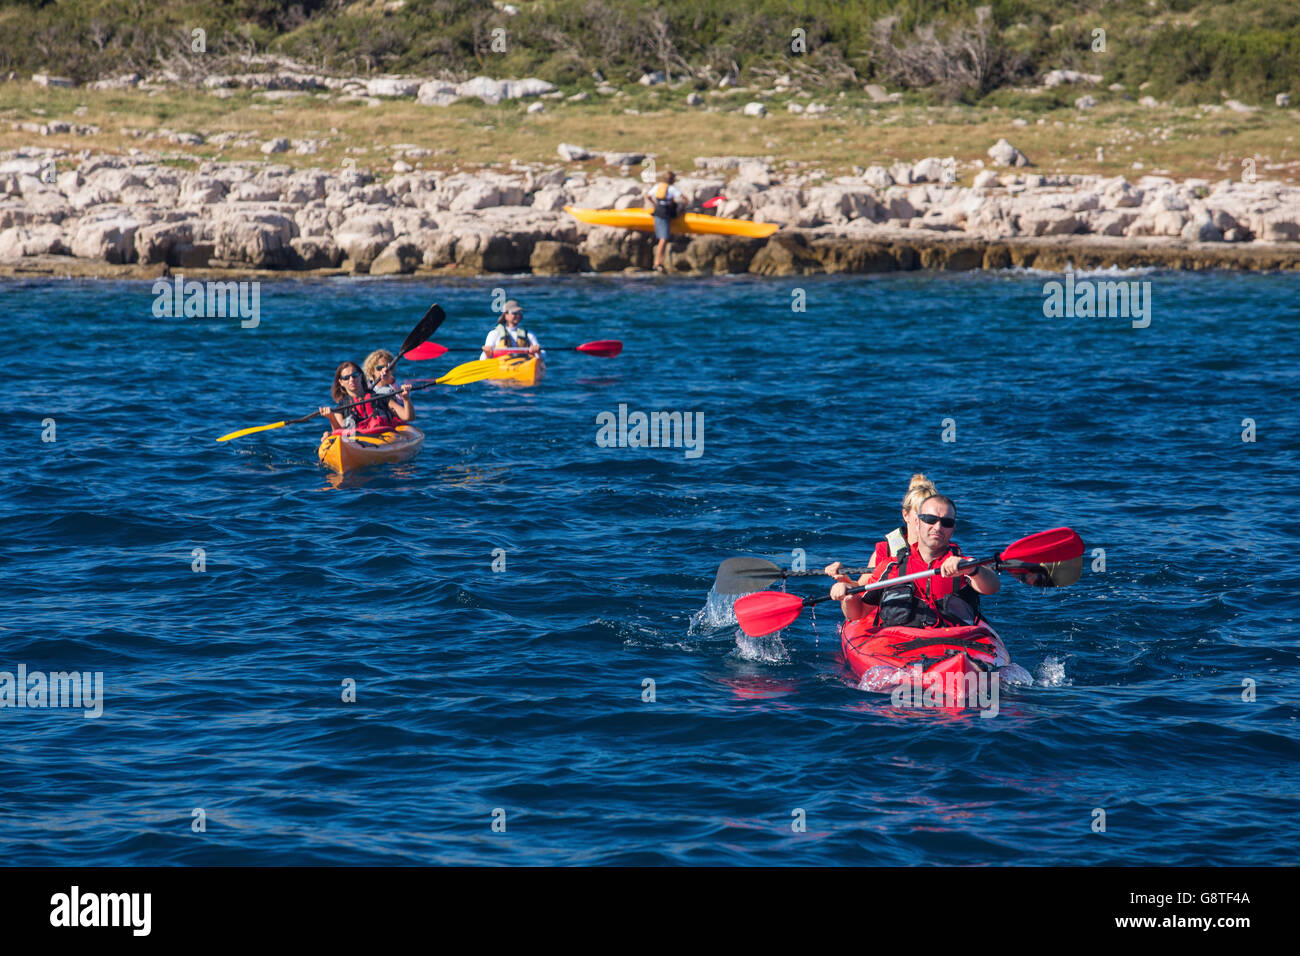 Group of people kayaking on river Stock Photo